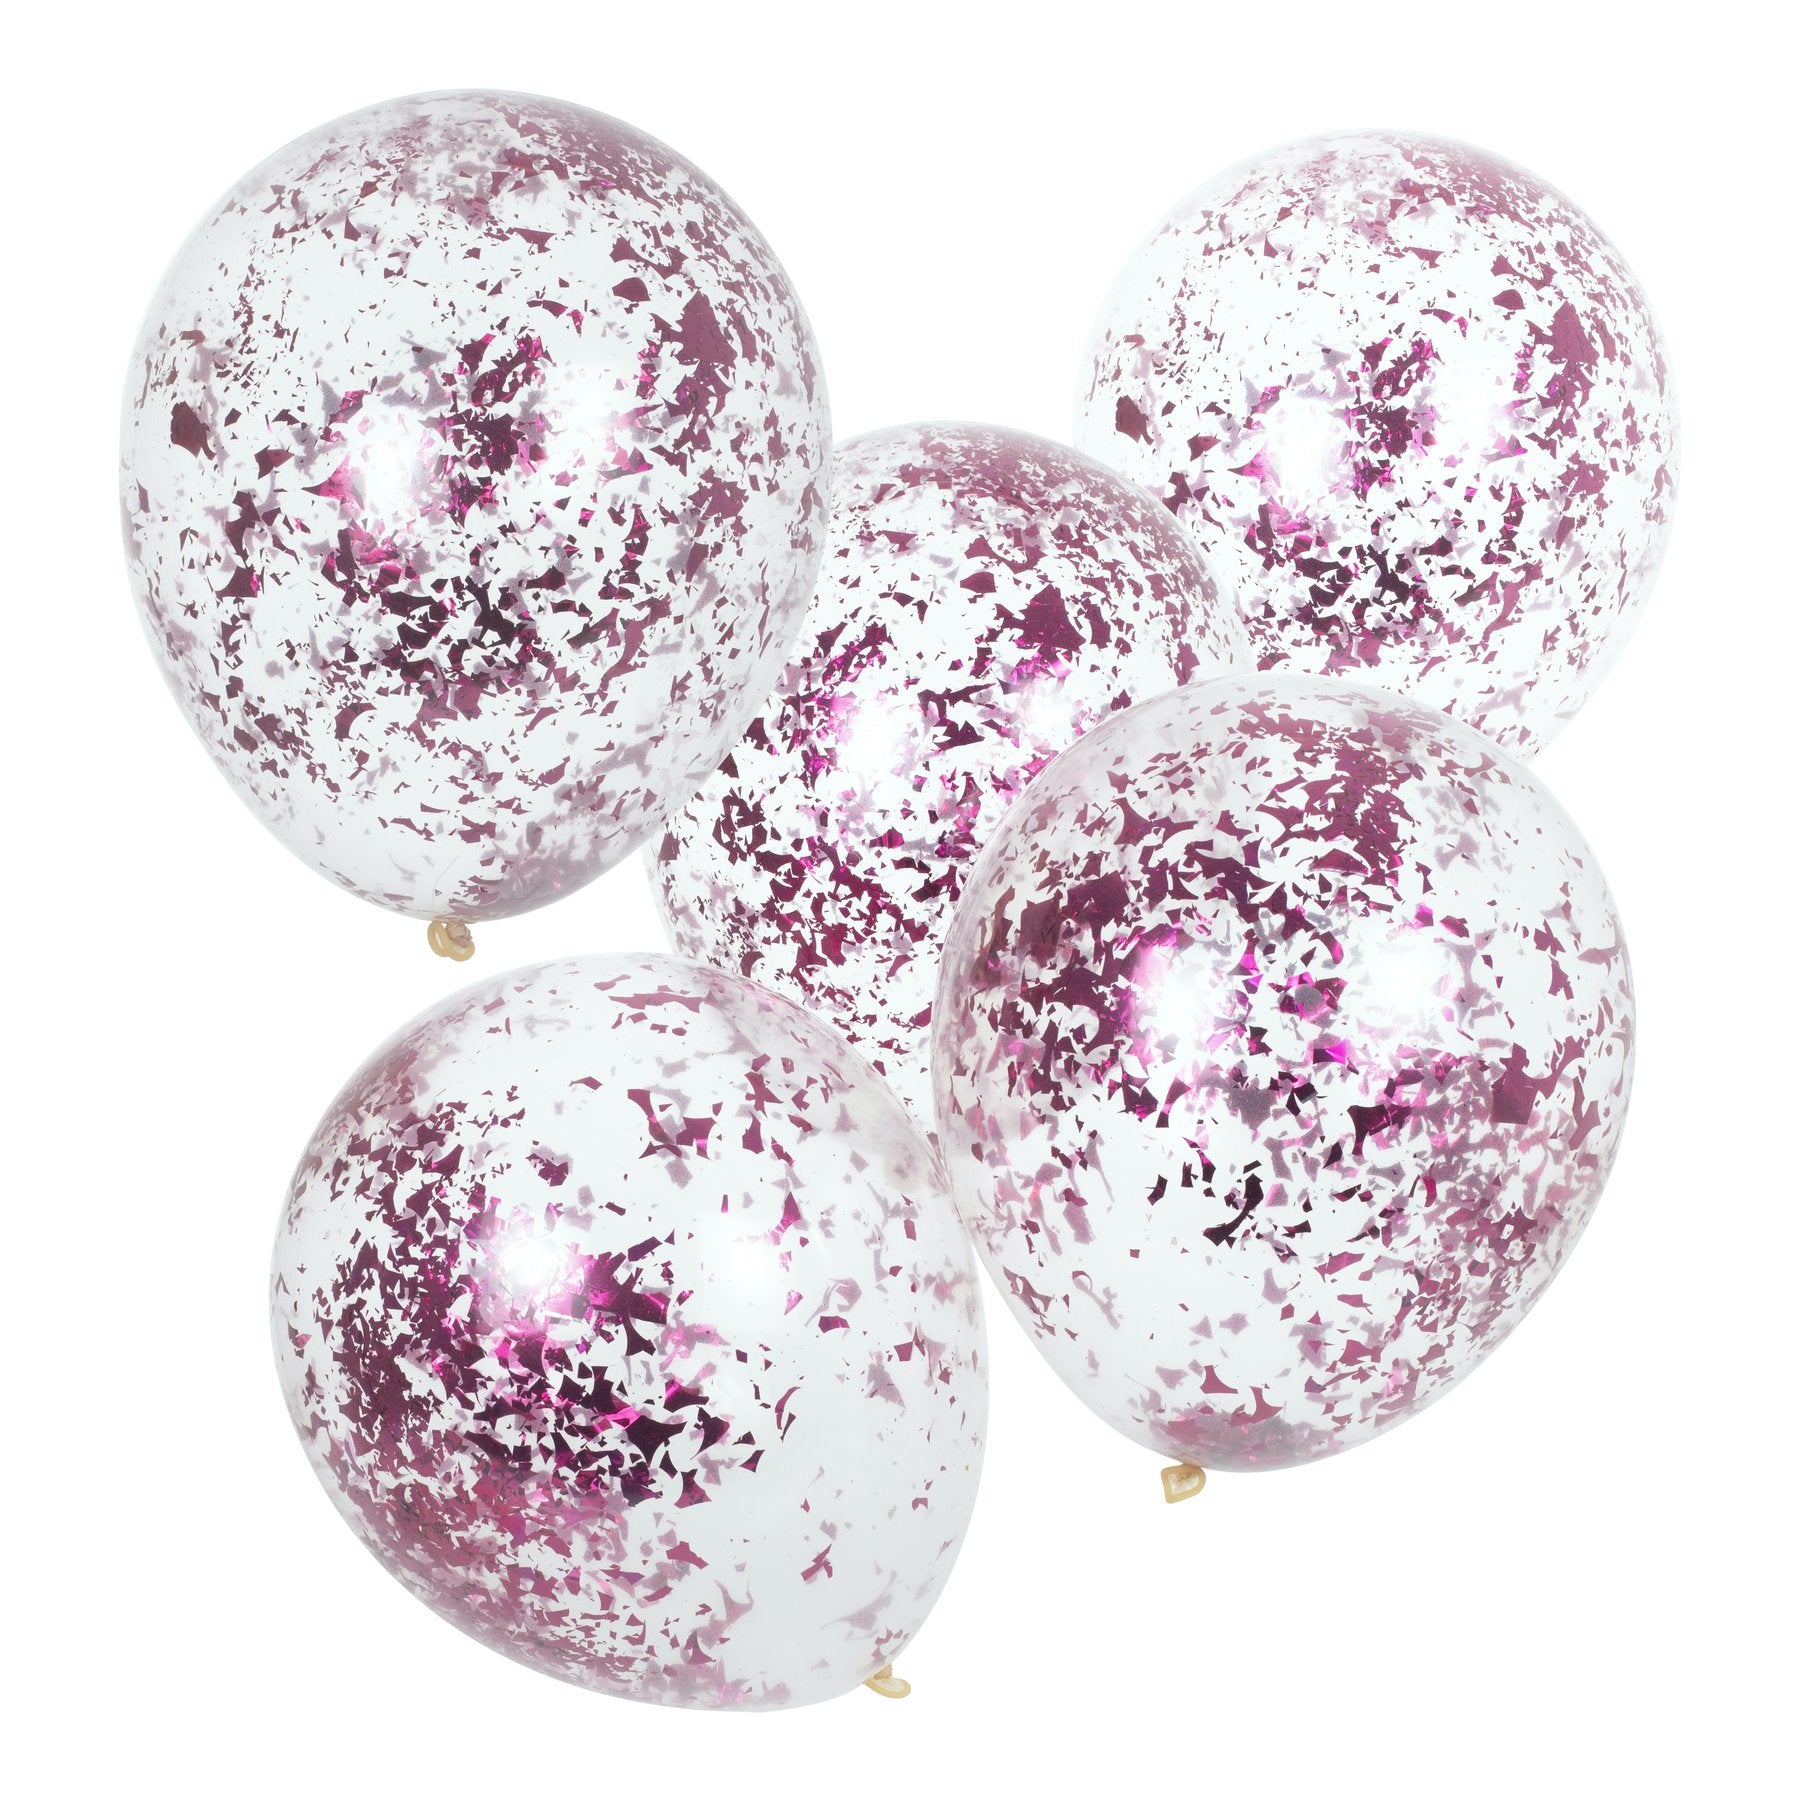 Pink Shredded Confetti Filled Party Balloons